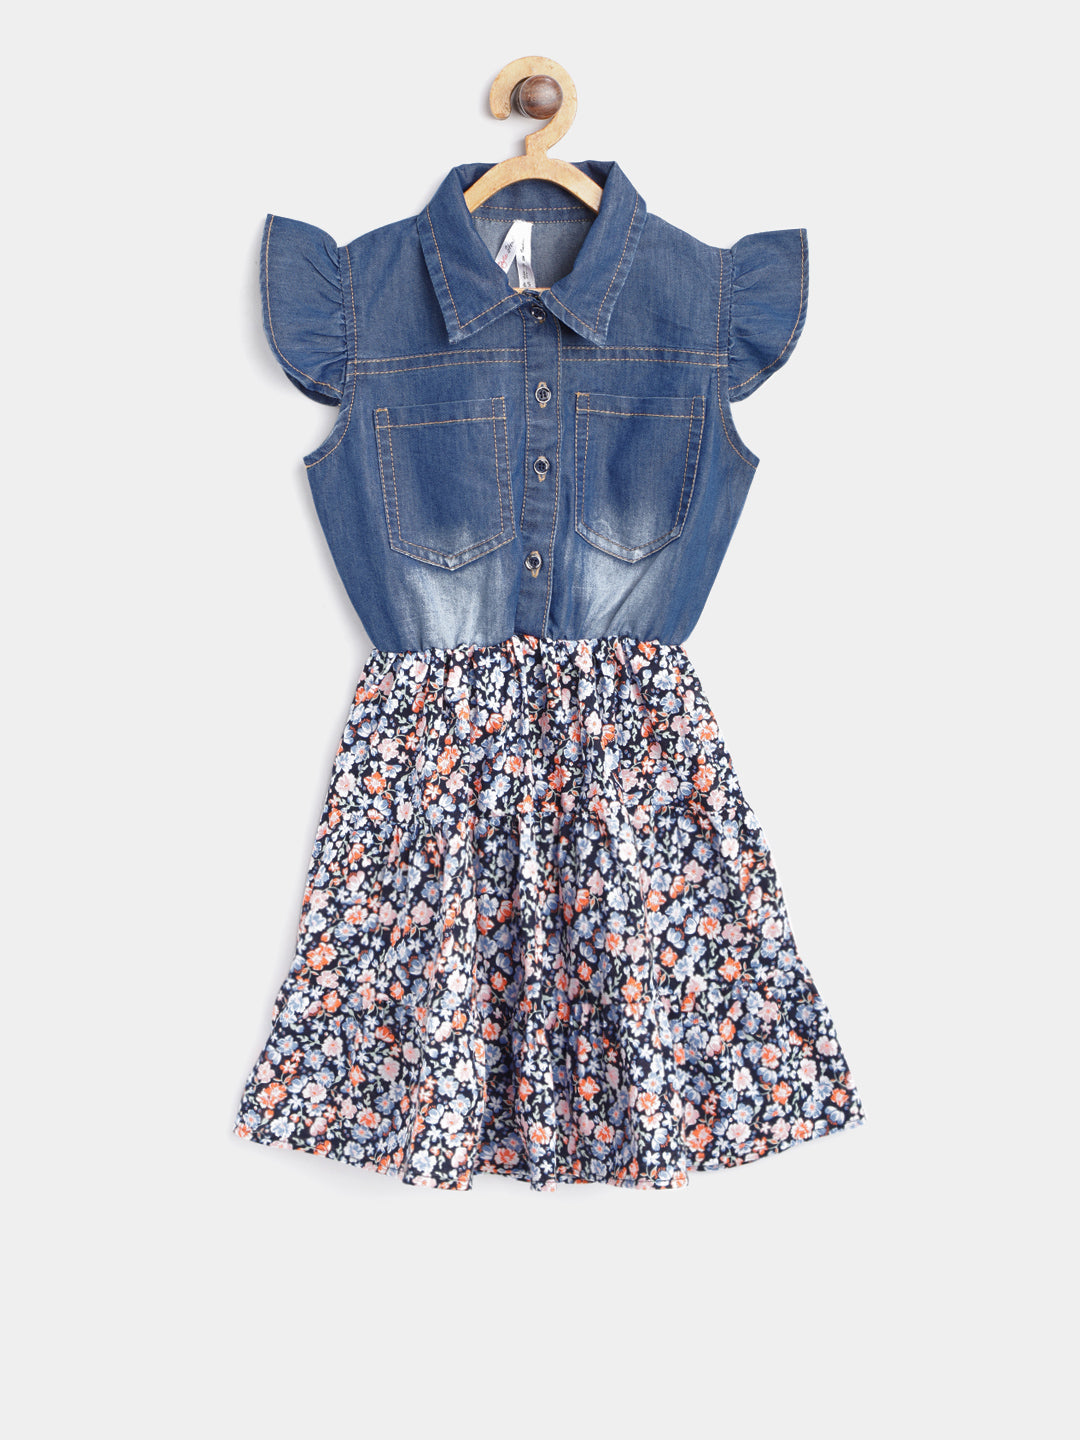 Girls Denim and Blue and Red Floral Printed Dress